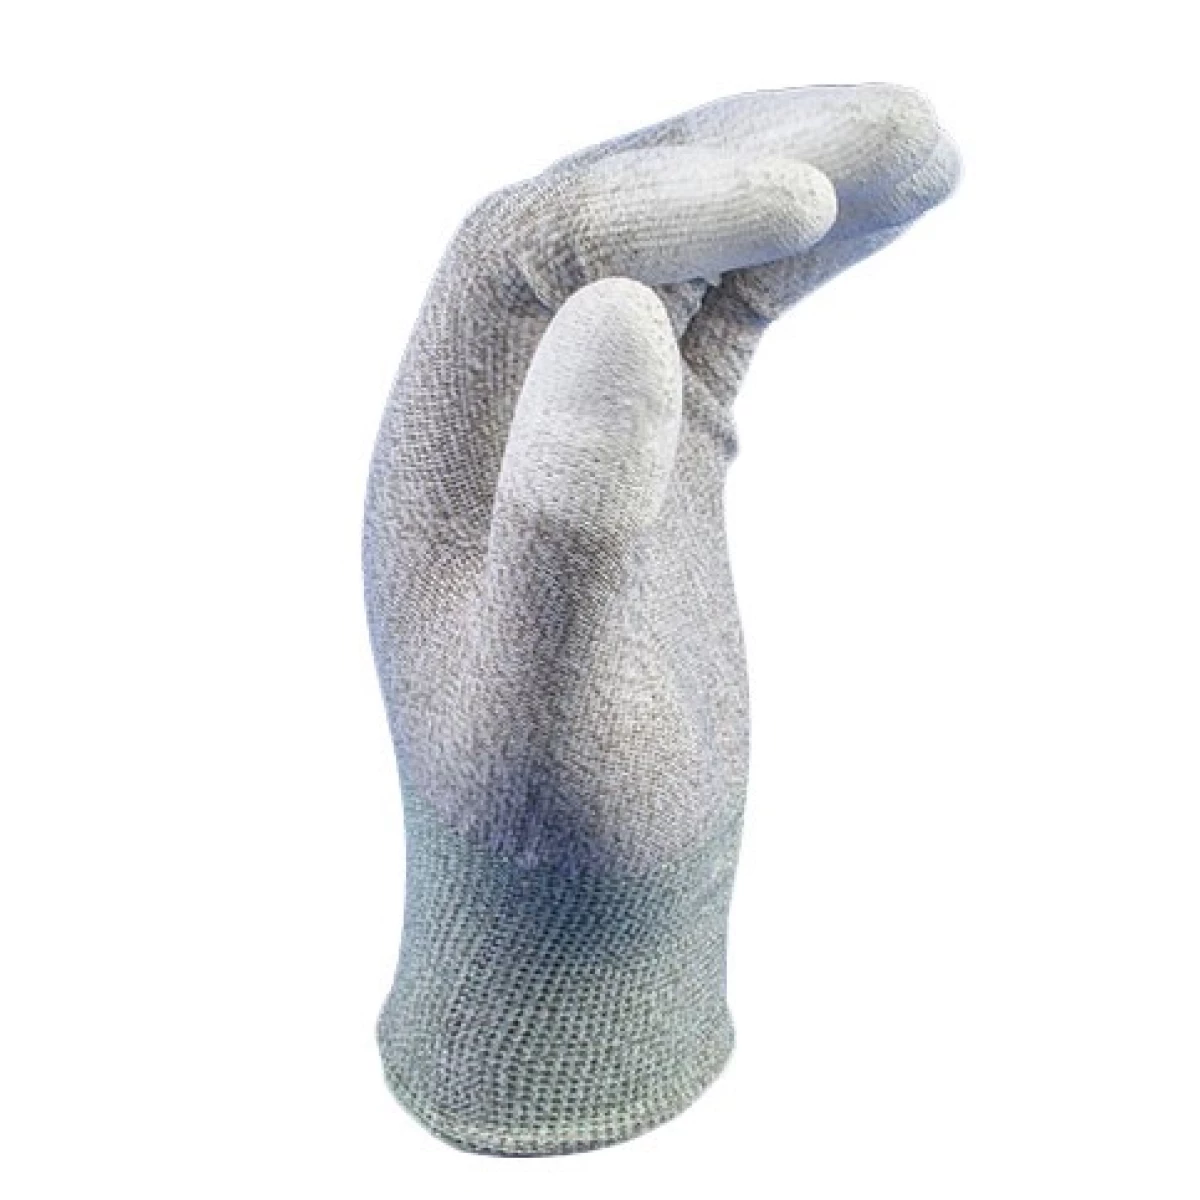 ESD gloves type C with coated fingertips